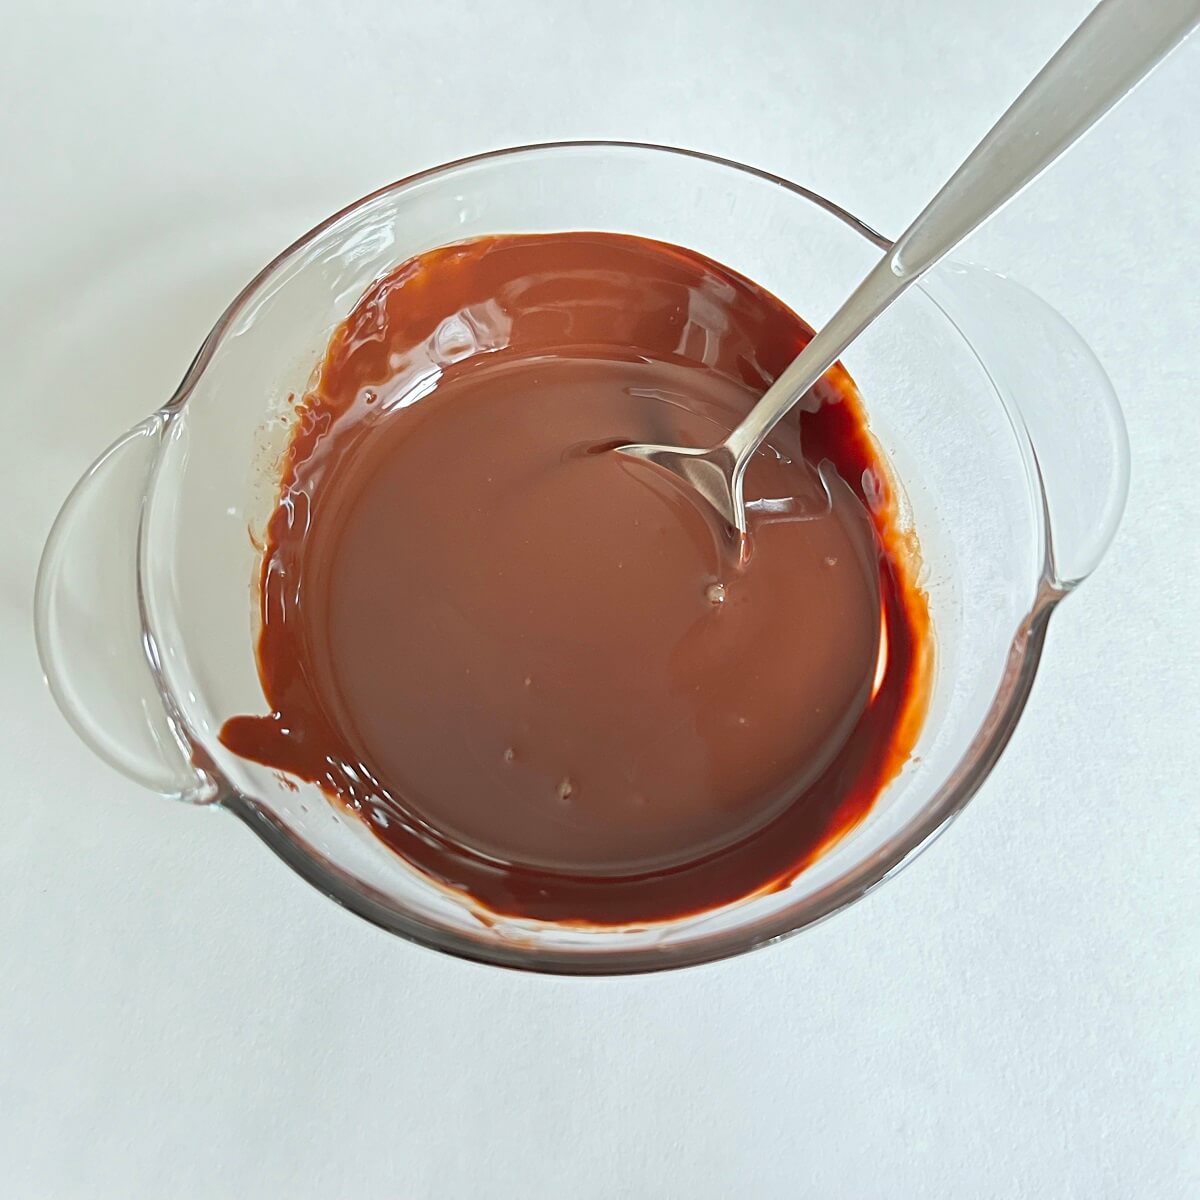 A liquid mixture of melted chocolate and extra virgin olive oil in a glass bowl.